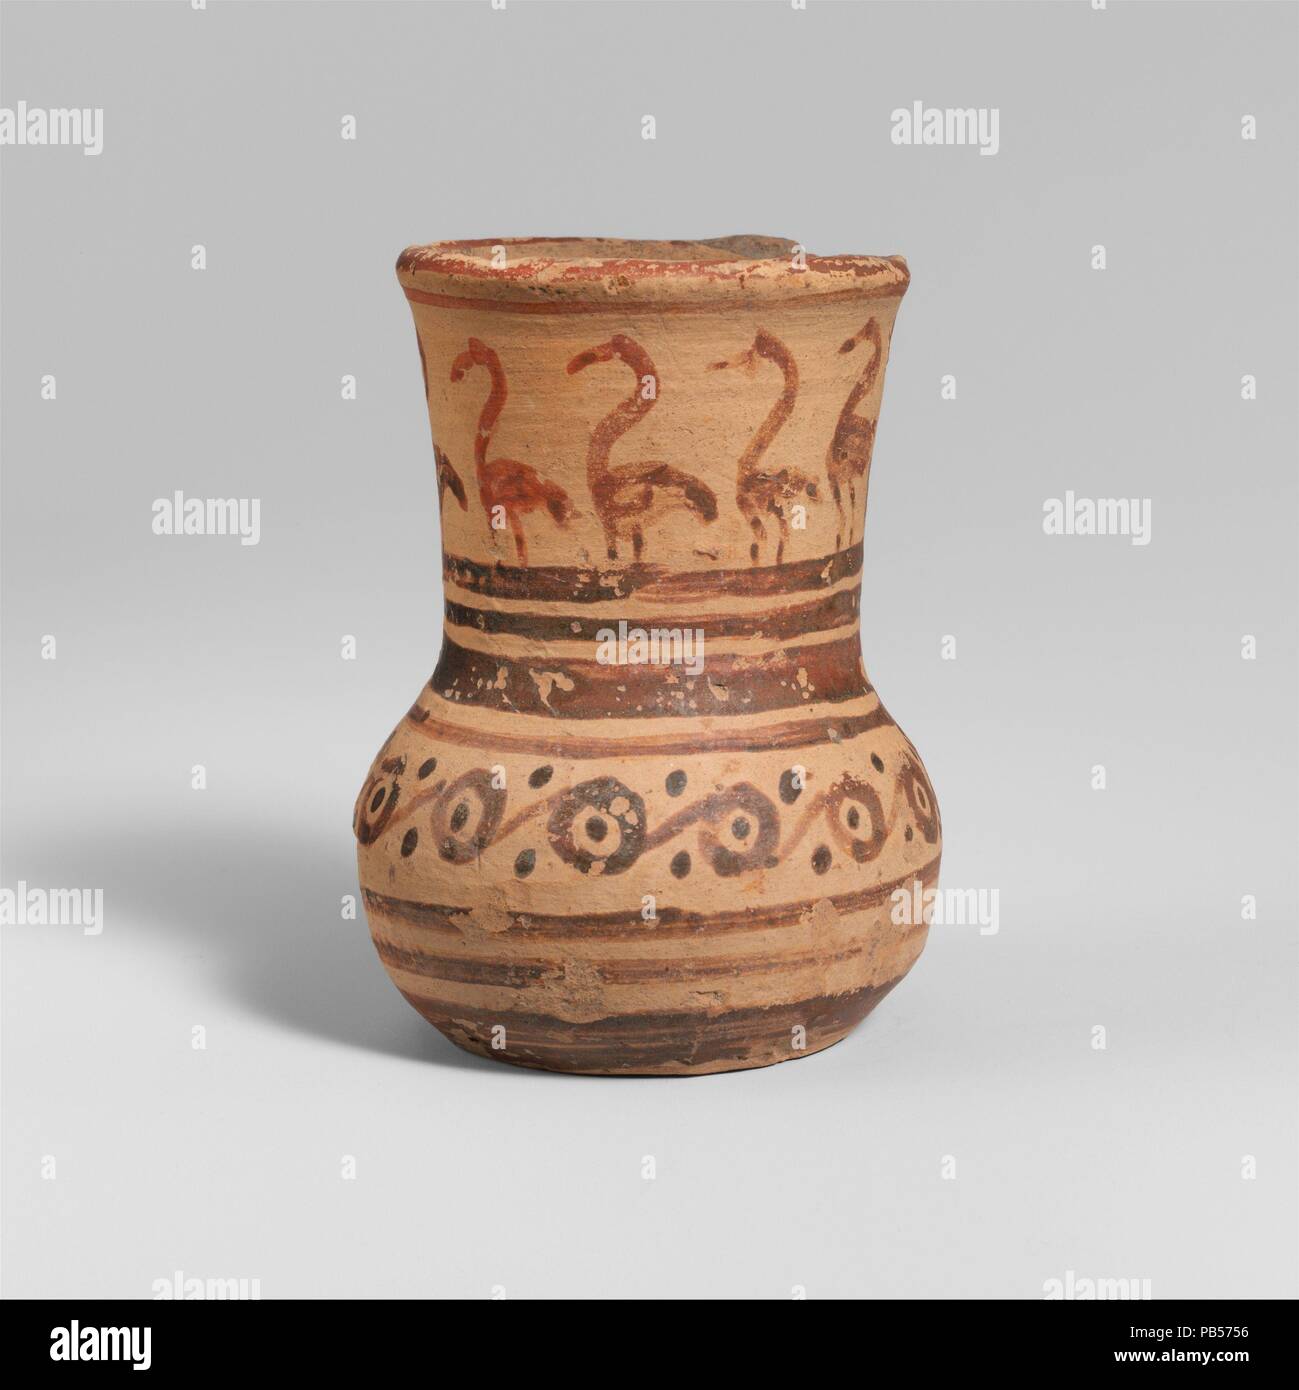 Terracotta tankard. Culture: Greek, Attic. Dimensions: H. 3 in. (7.6 cm). Date: late 8th-early 7th century B.C..  On the neck, waterbirds. Museum: Metropolitan Museum of Art, New York, USA. Stock Photo